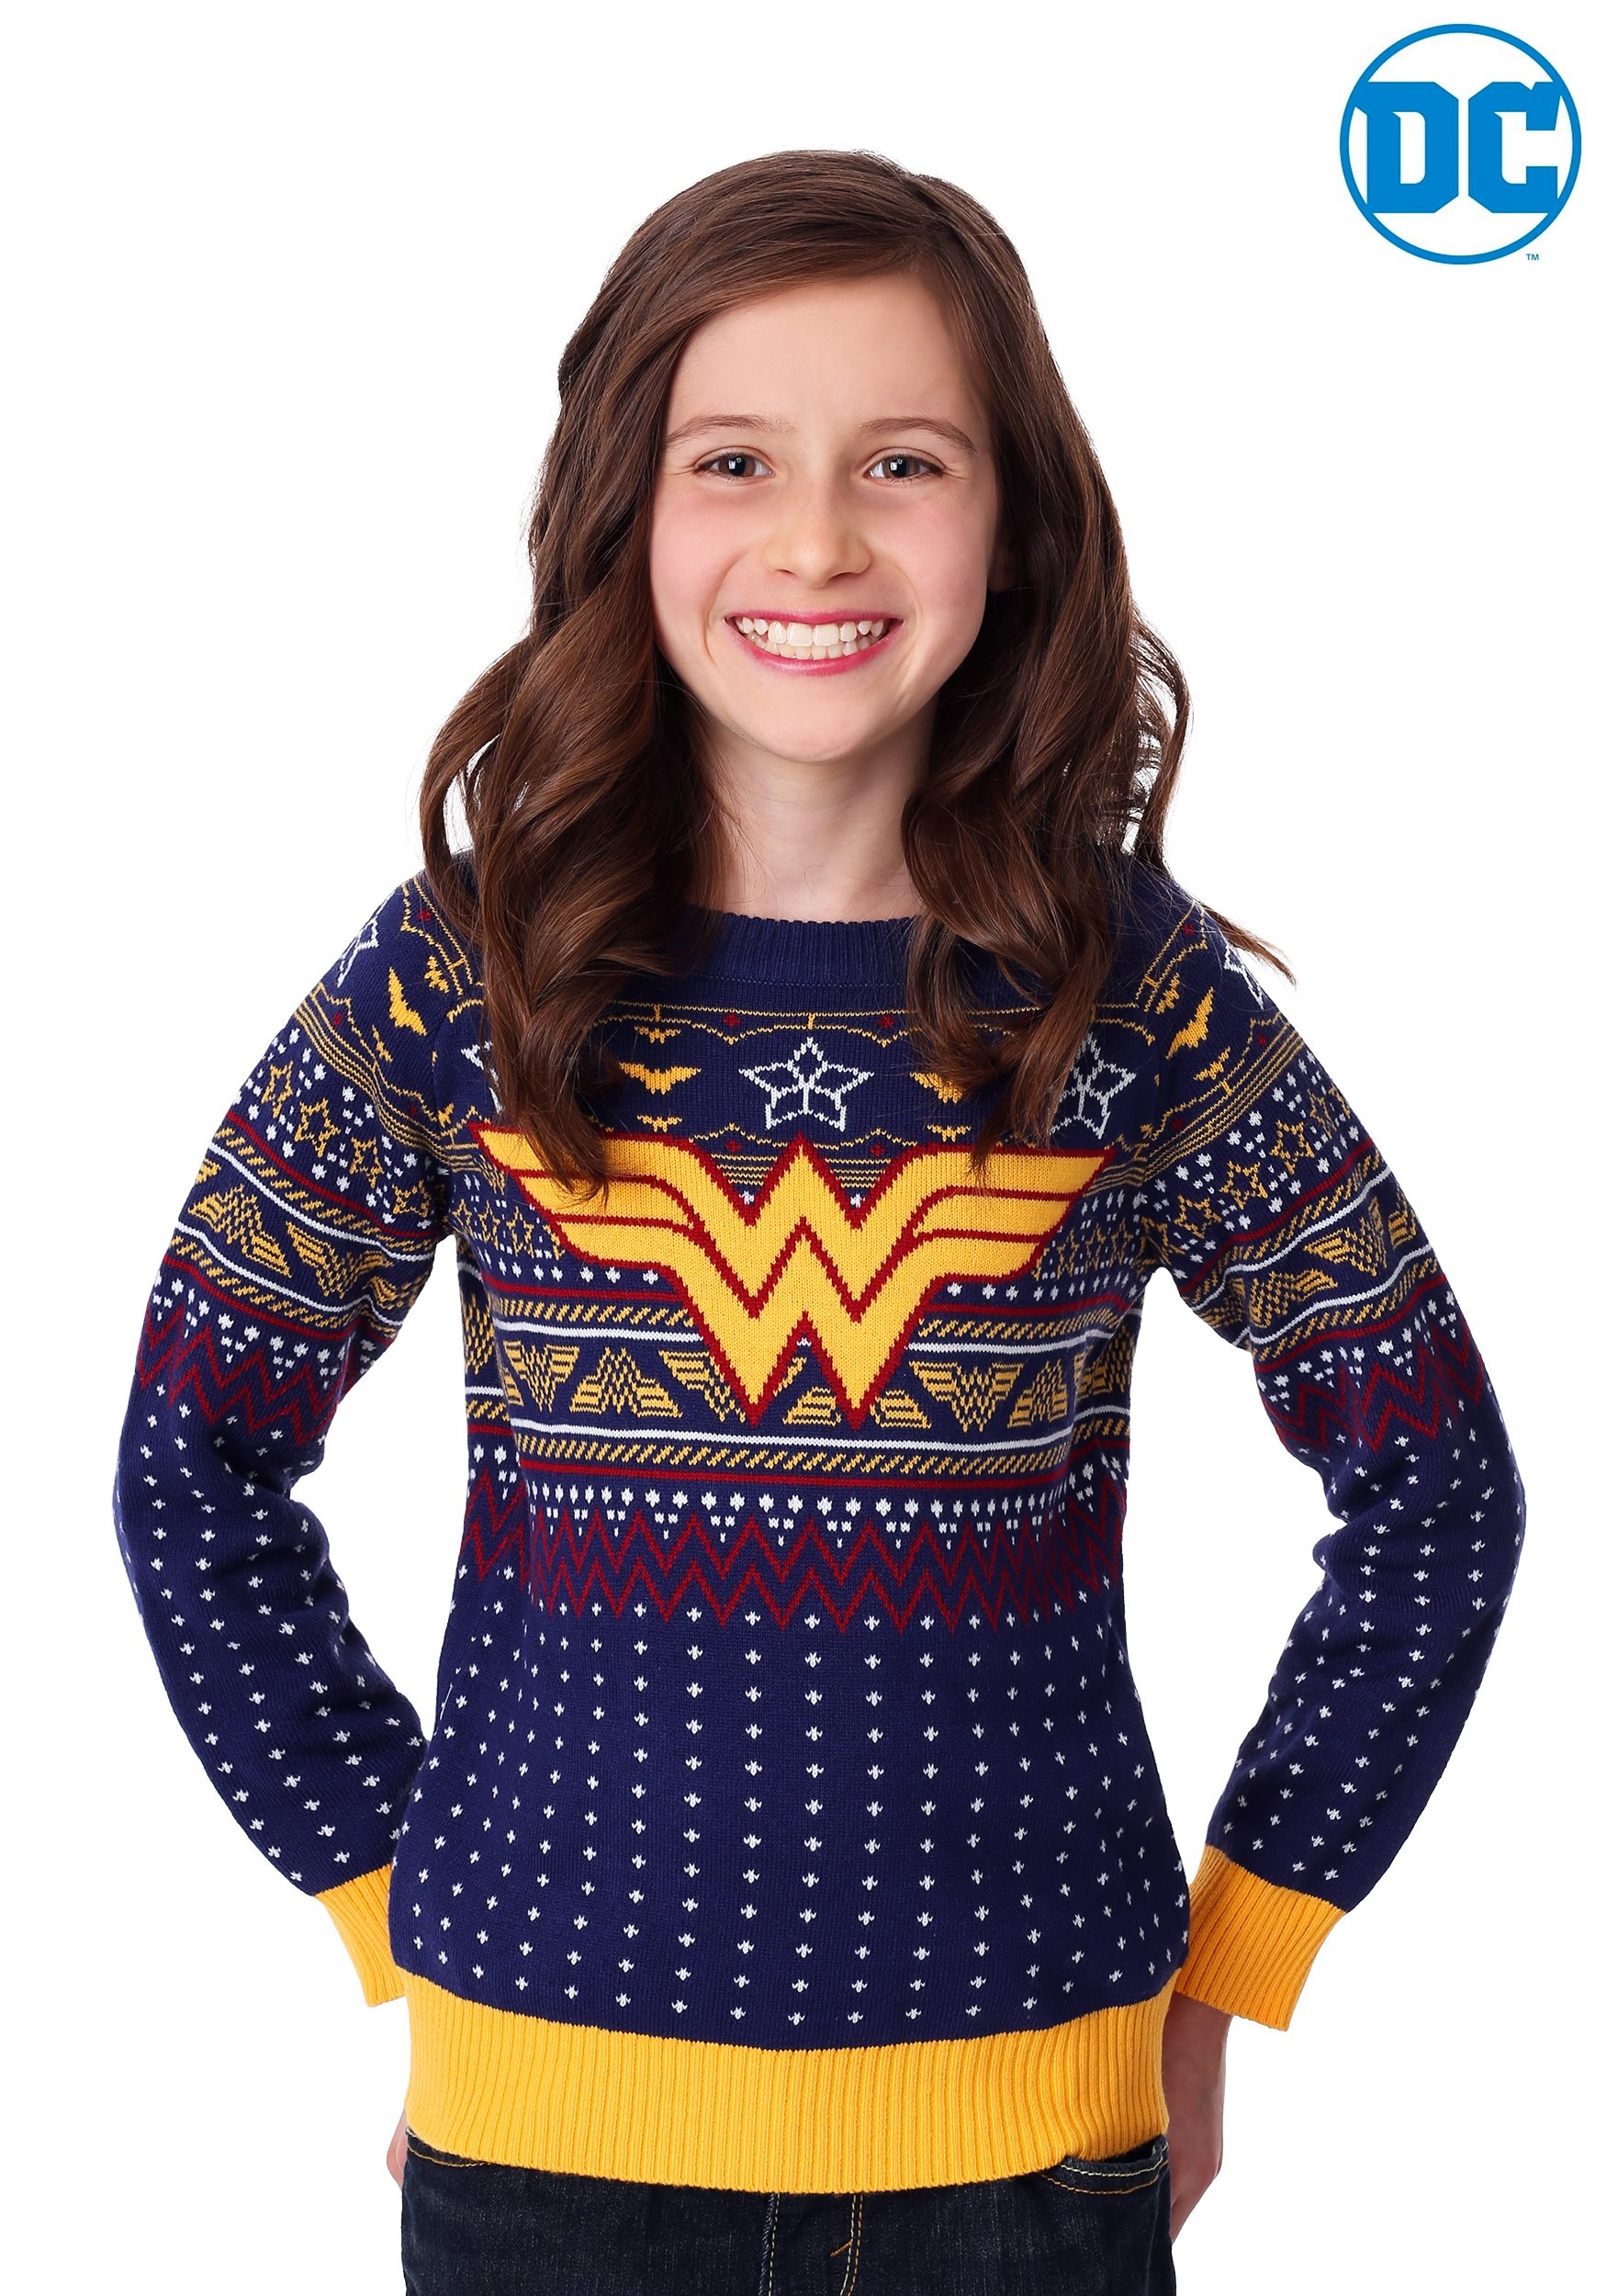 Kid's Wonder Woman Navy Ugly Christmas Sweater - image 3 of 4